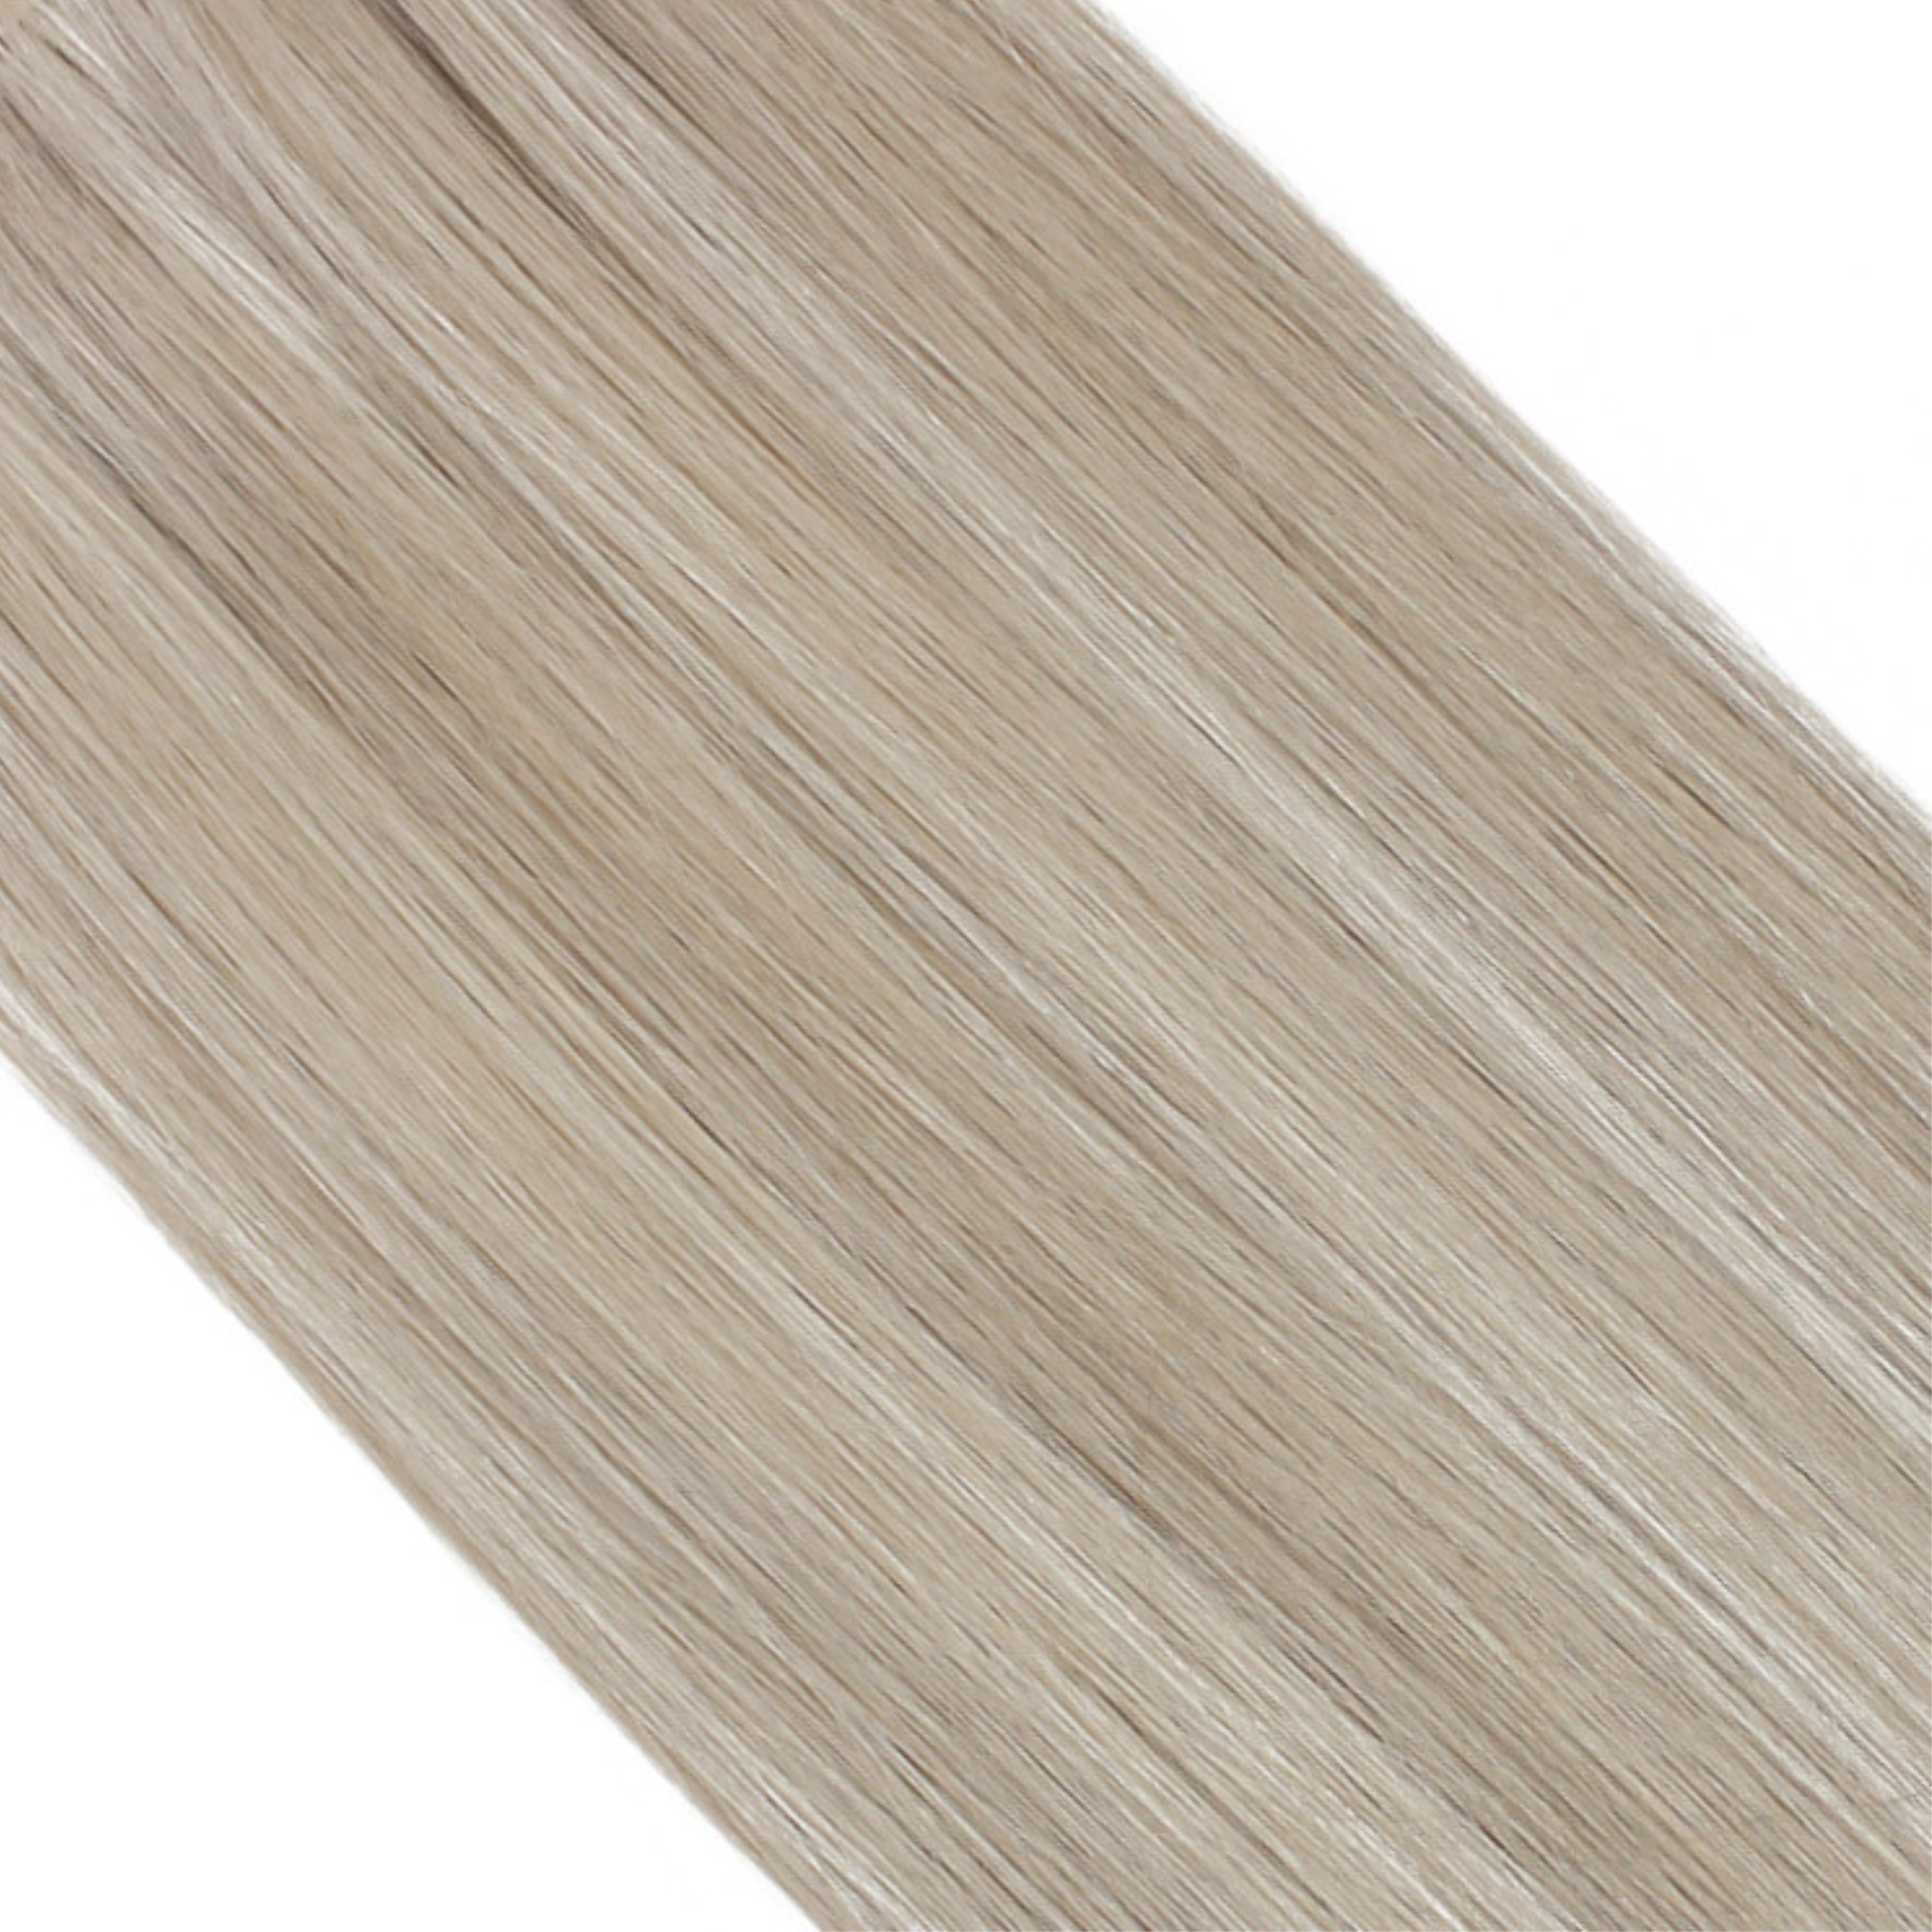 "hair rehab london 14" weft hair extensions shade swatch titled steel blonde"